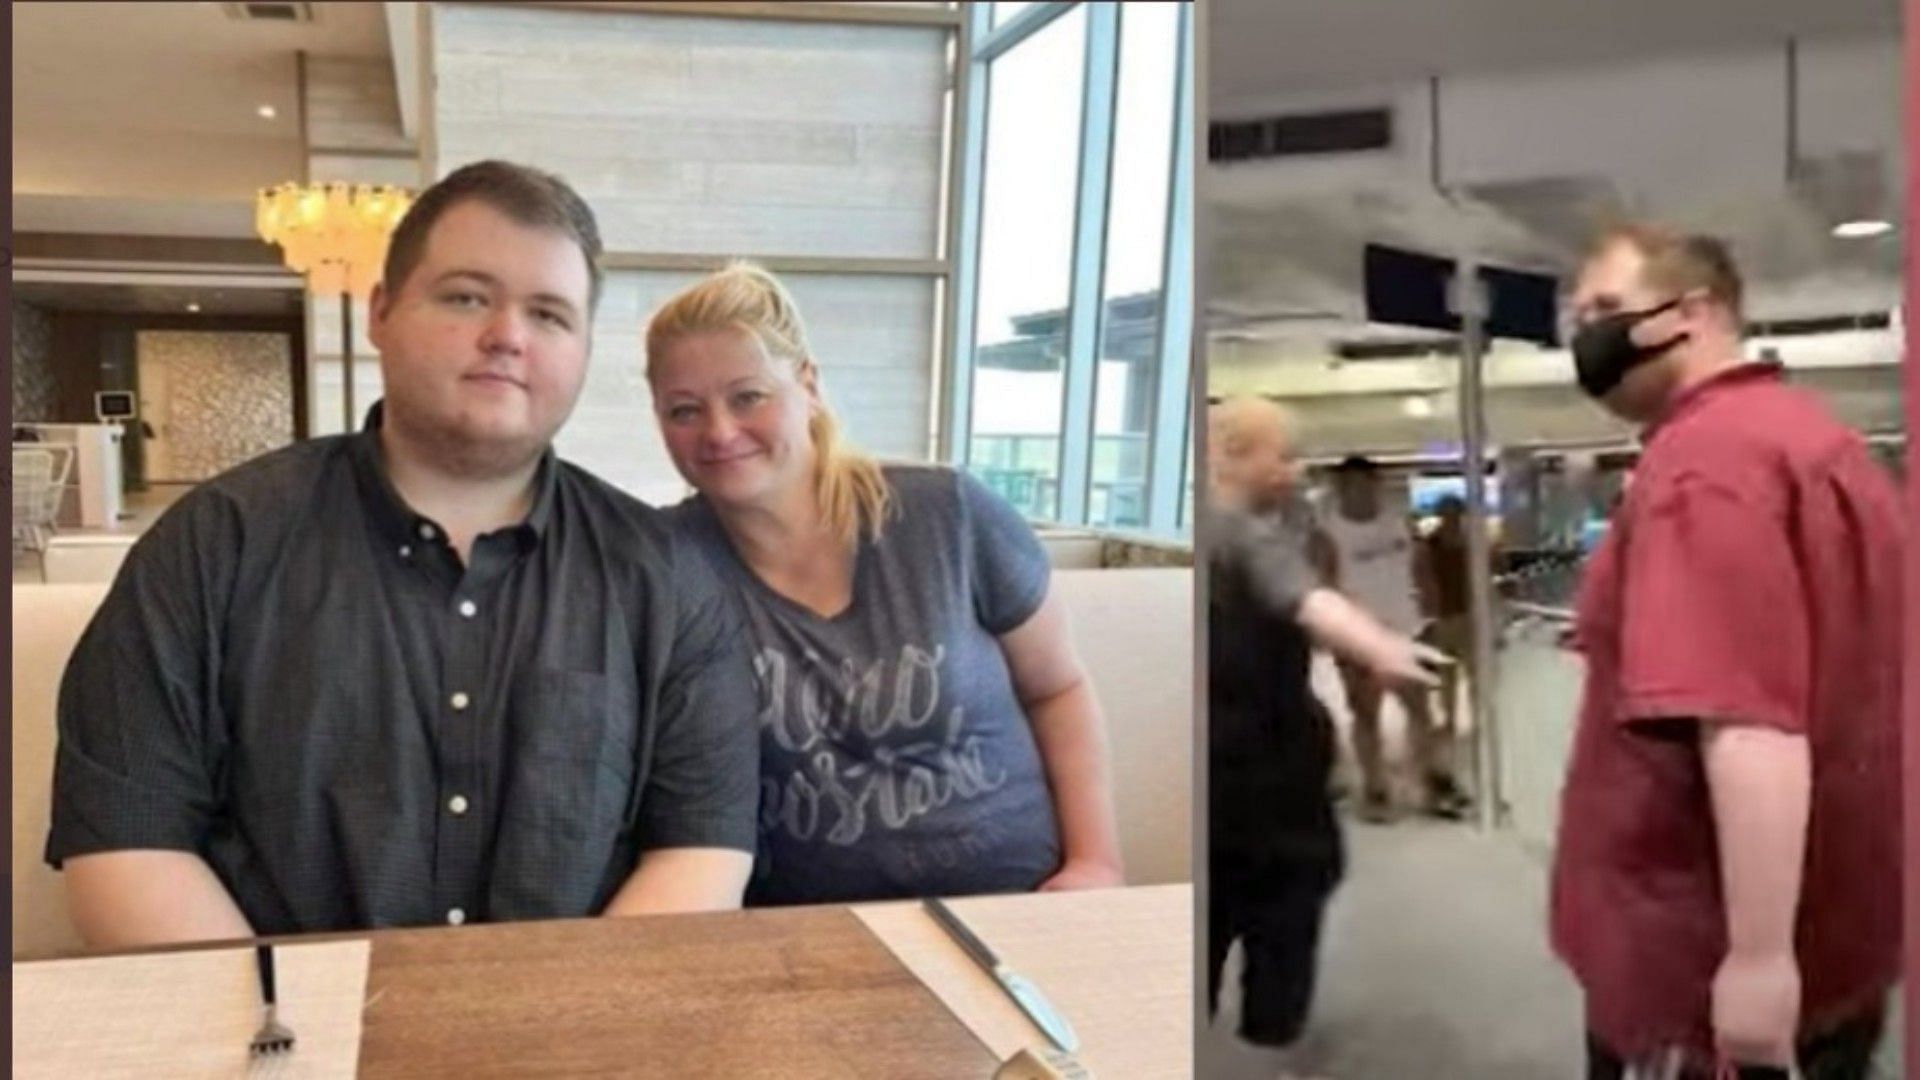 WATCH: Old video shows Club Q shooter Anderson Lee Aldrich and their mother  making racist comments at the airport